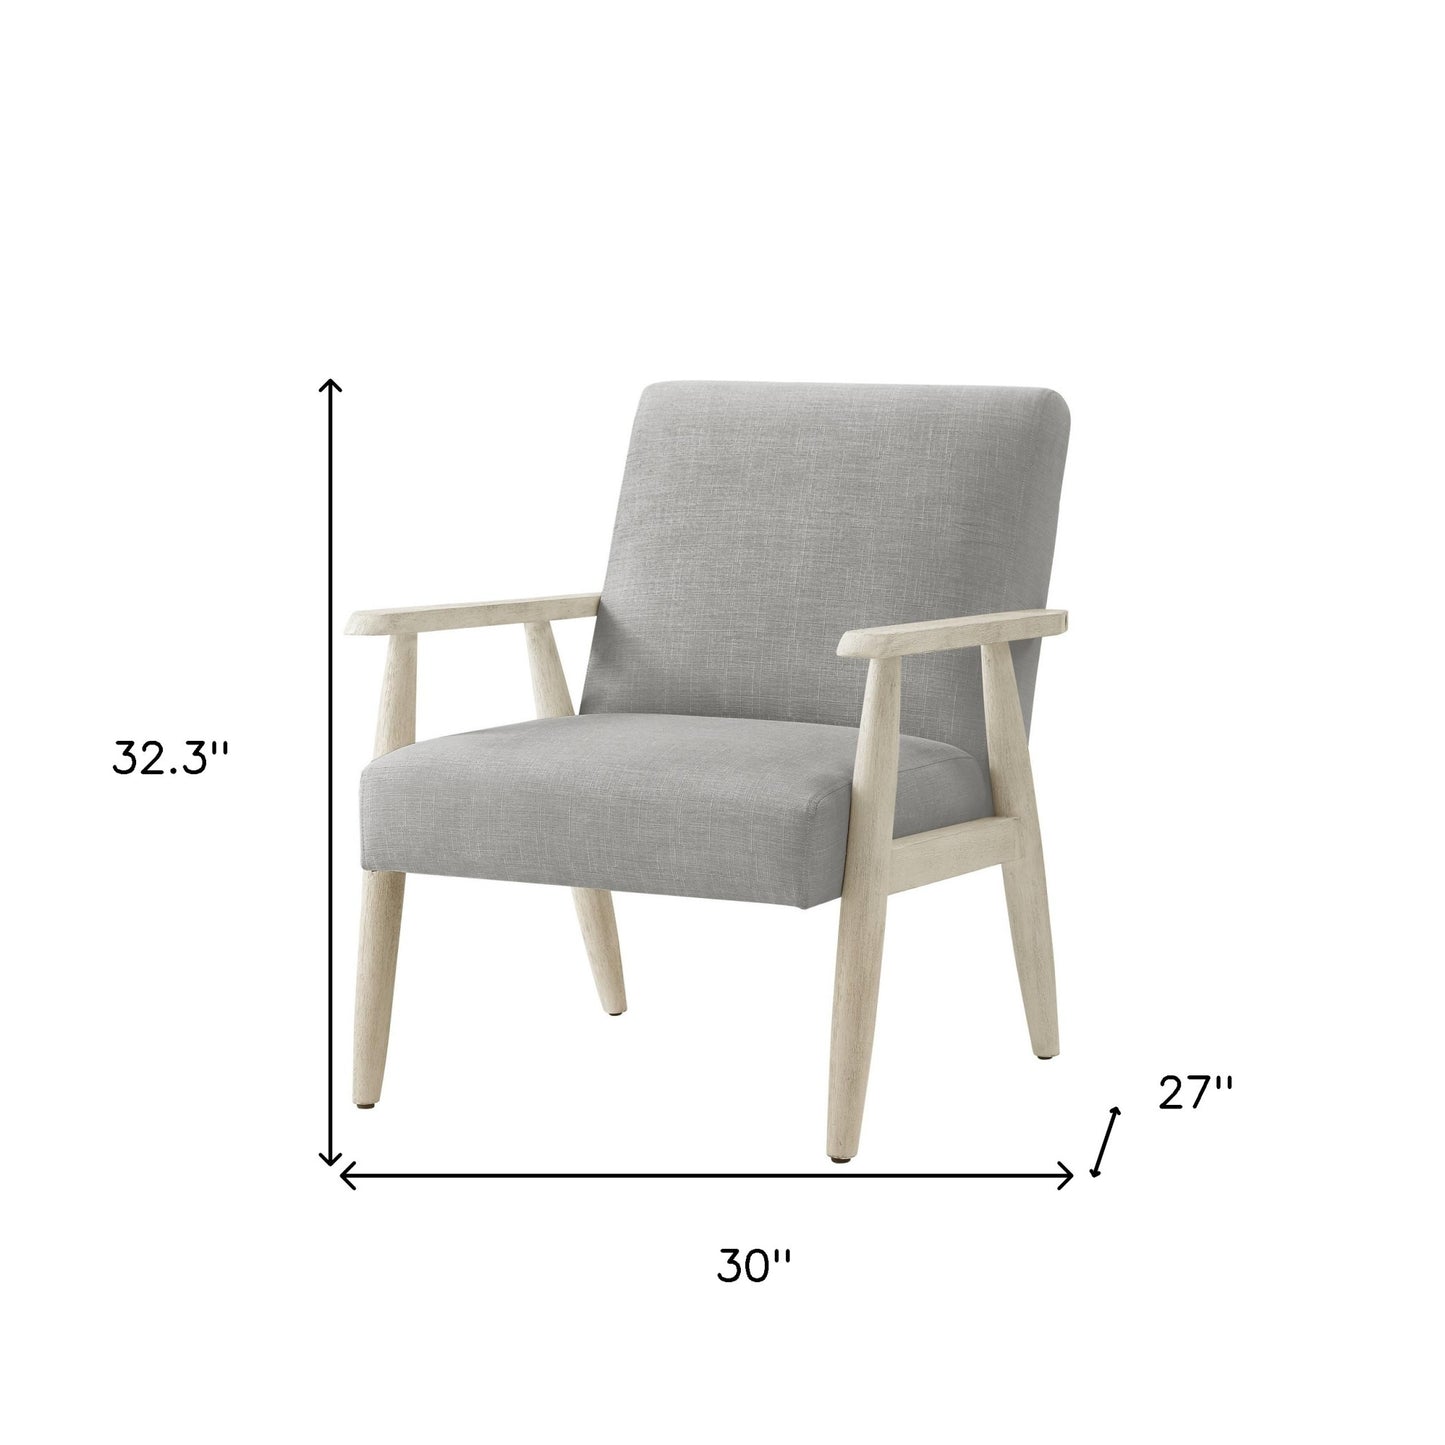 30" Gray And Cream Linen Arm Chair